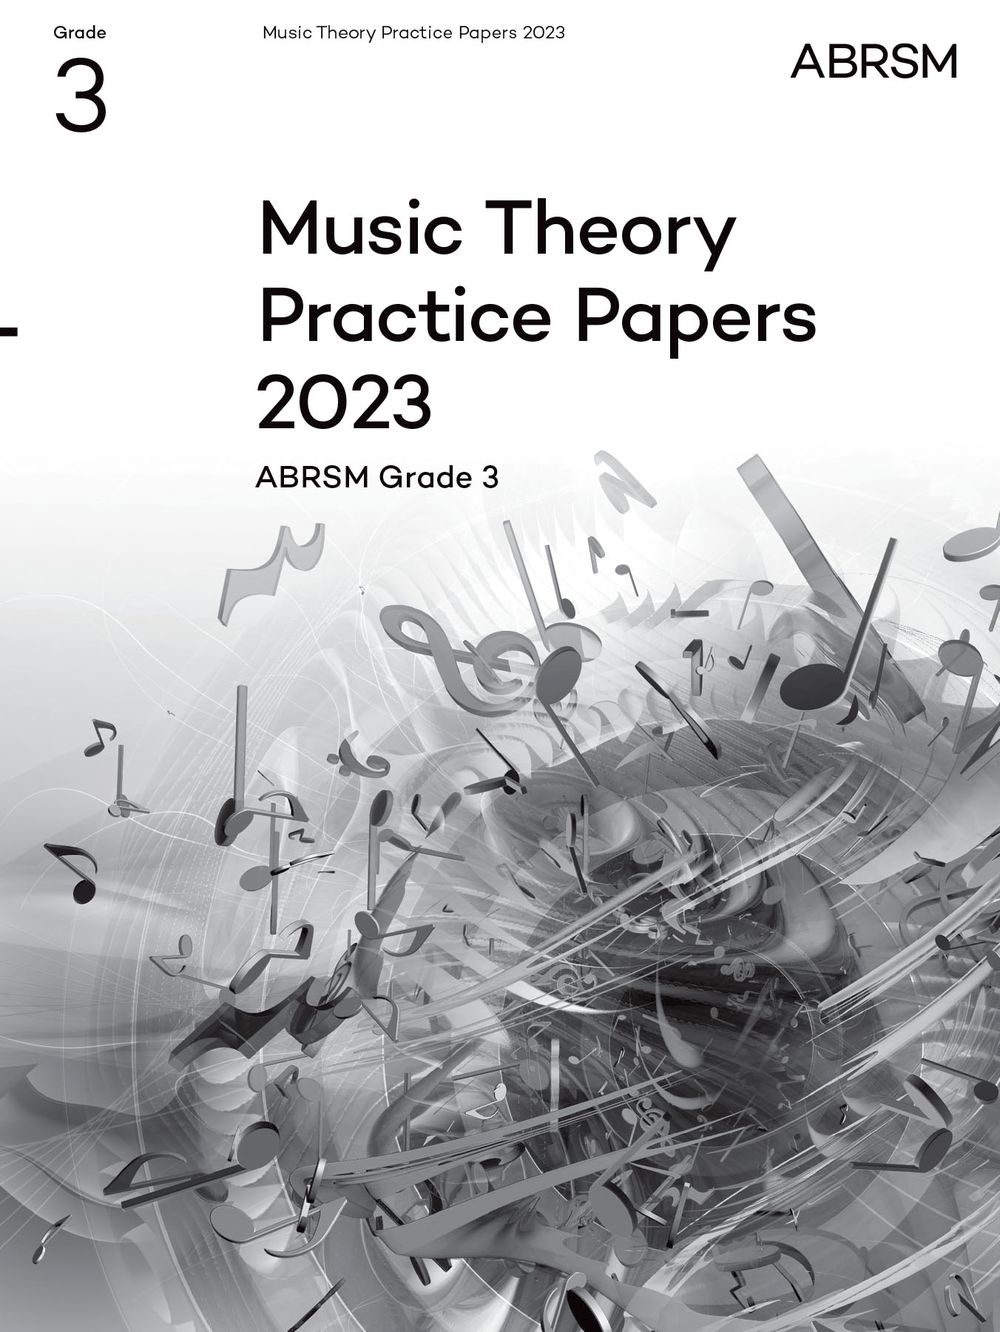 Music Theory Practice Papers 2023, ABRSM Grade 3